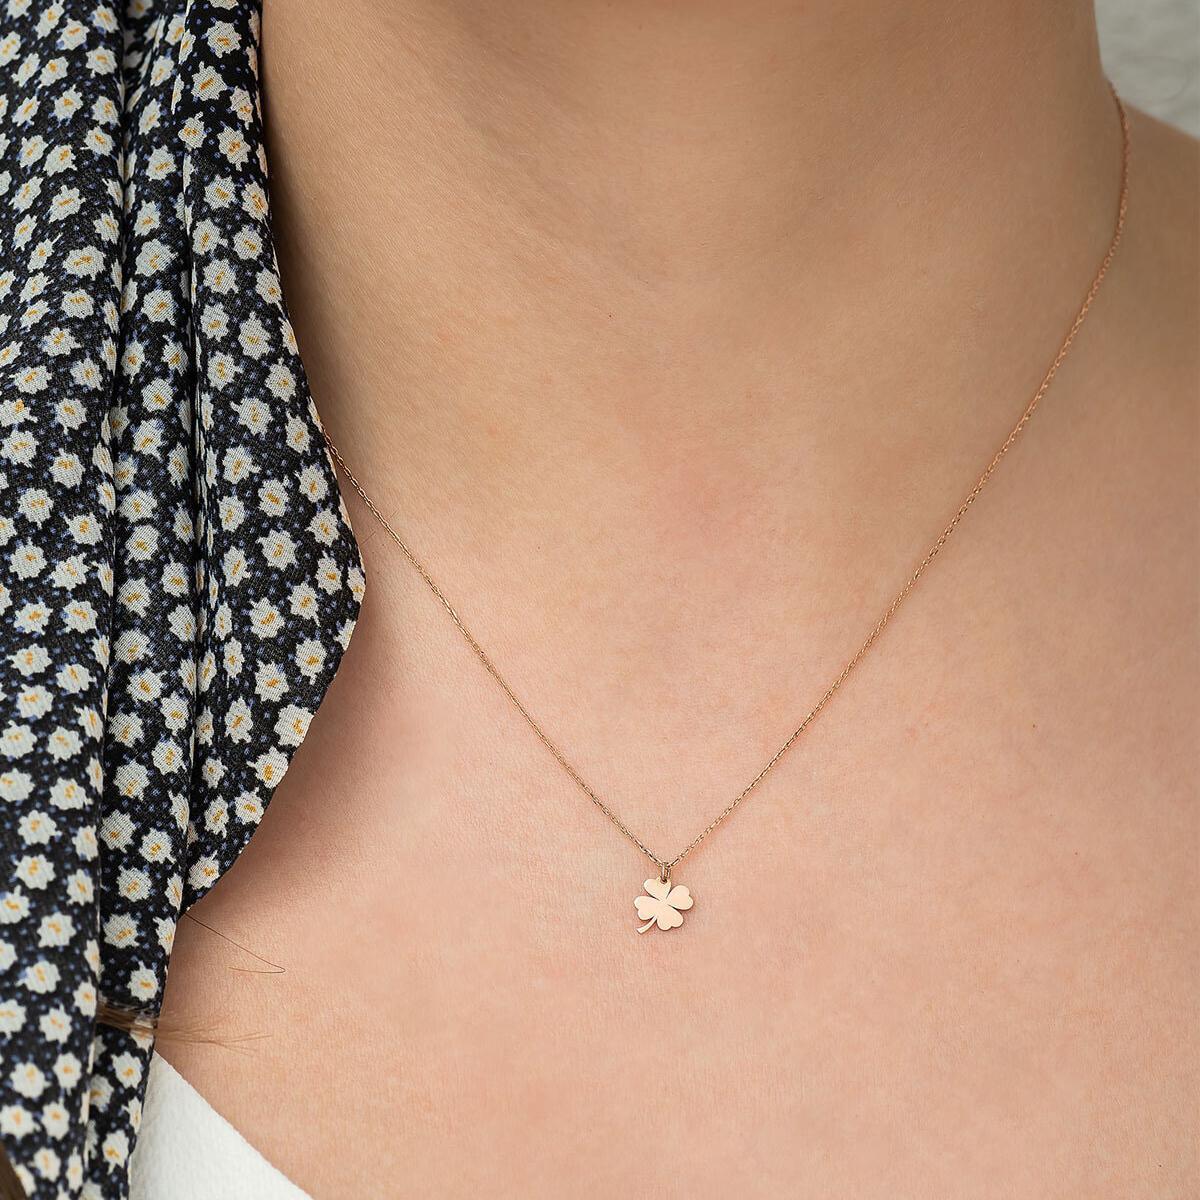 Four Leaf Clover Necklace • Clover Necklace Gold • Gift For Girlfriend - Trending Silver Gifts